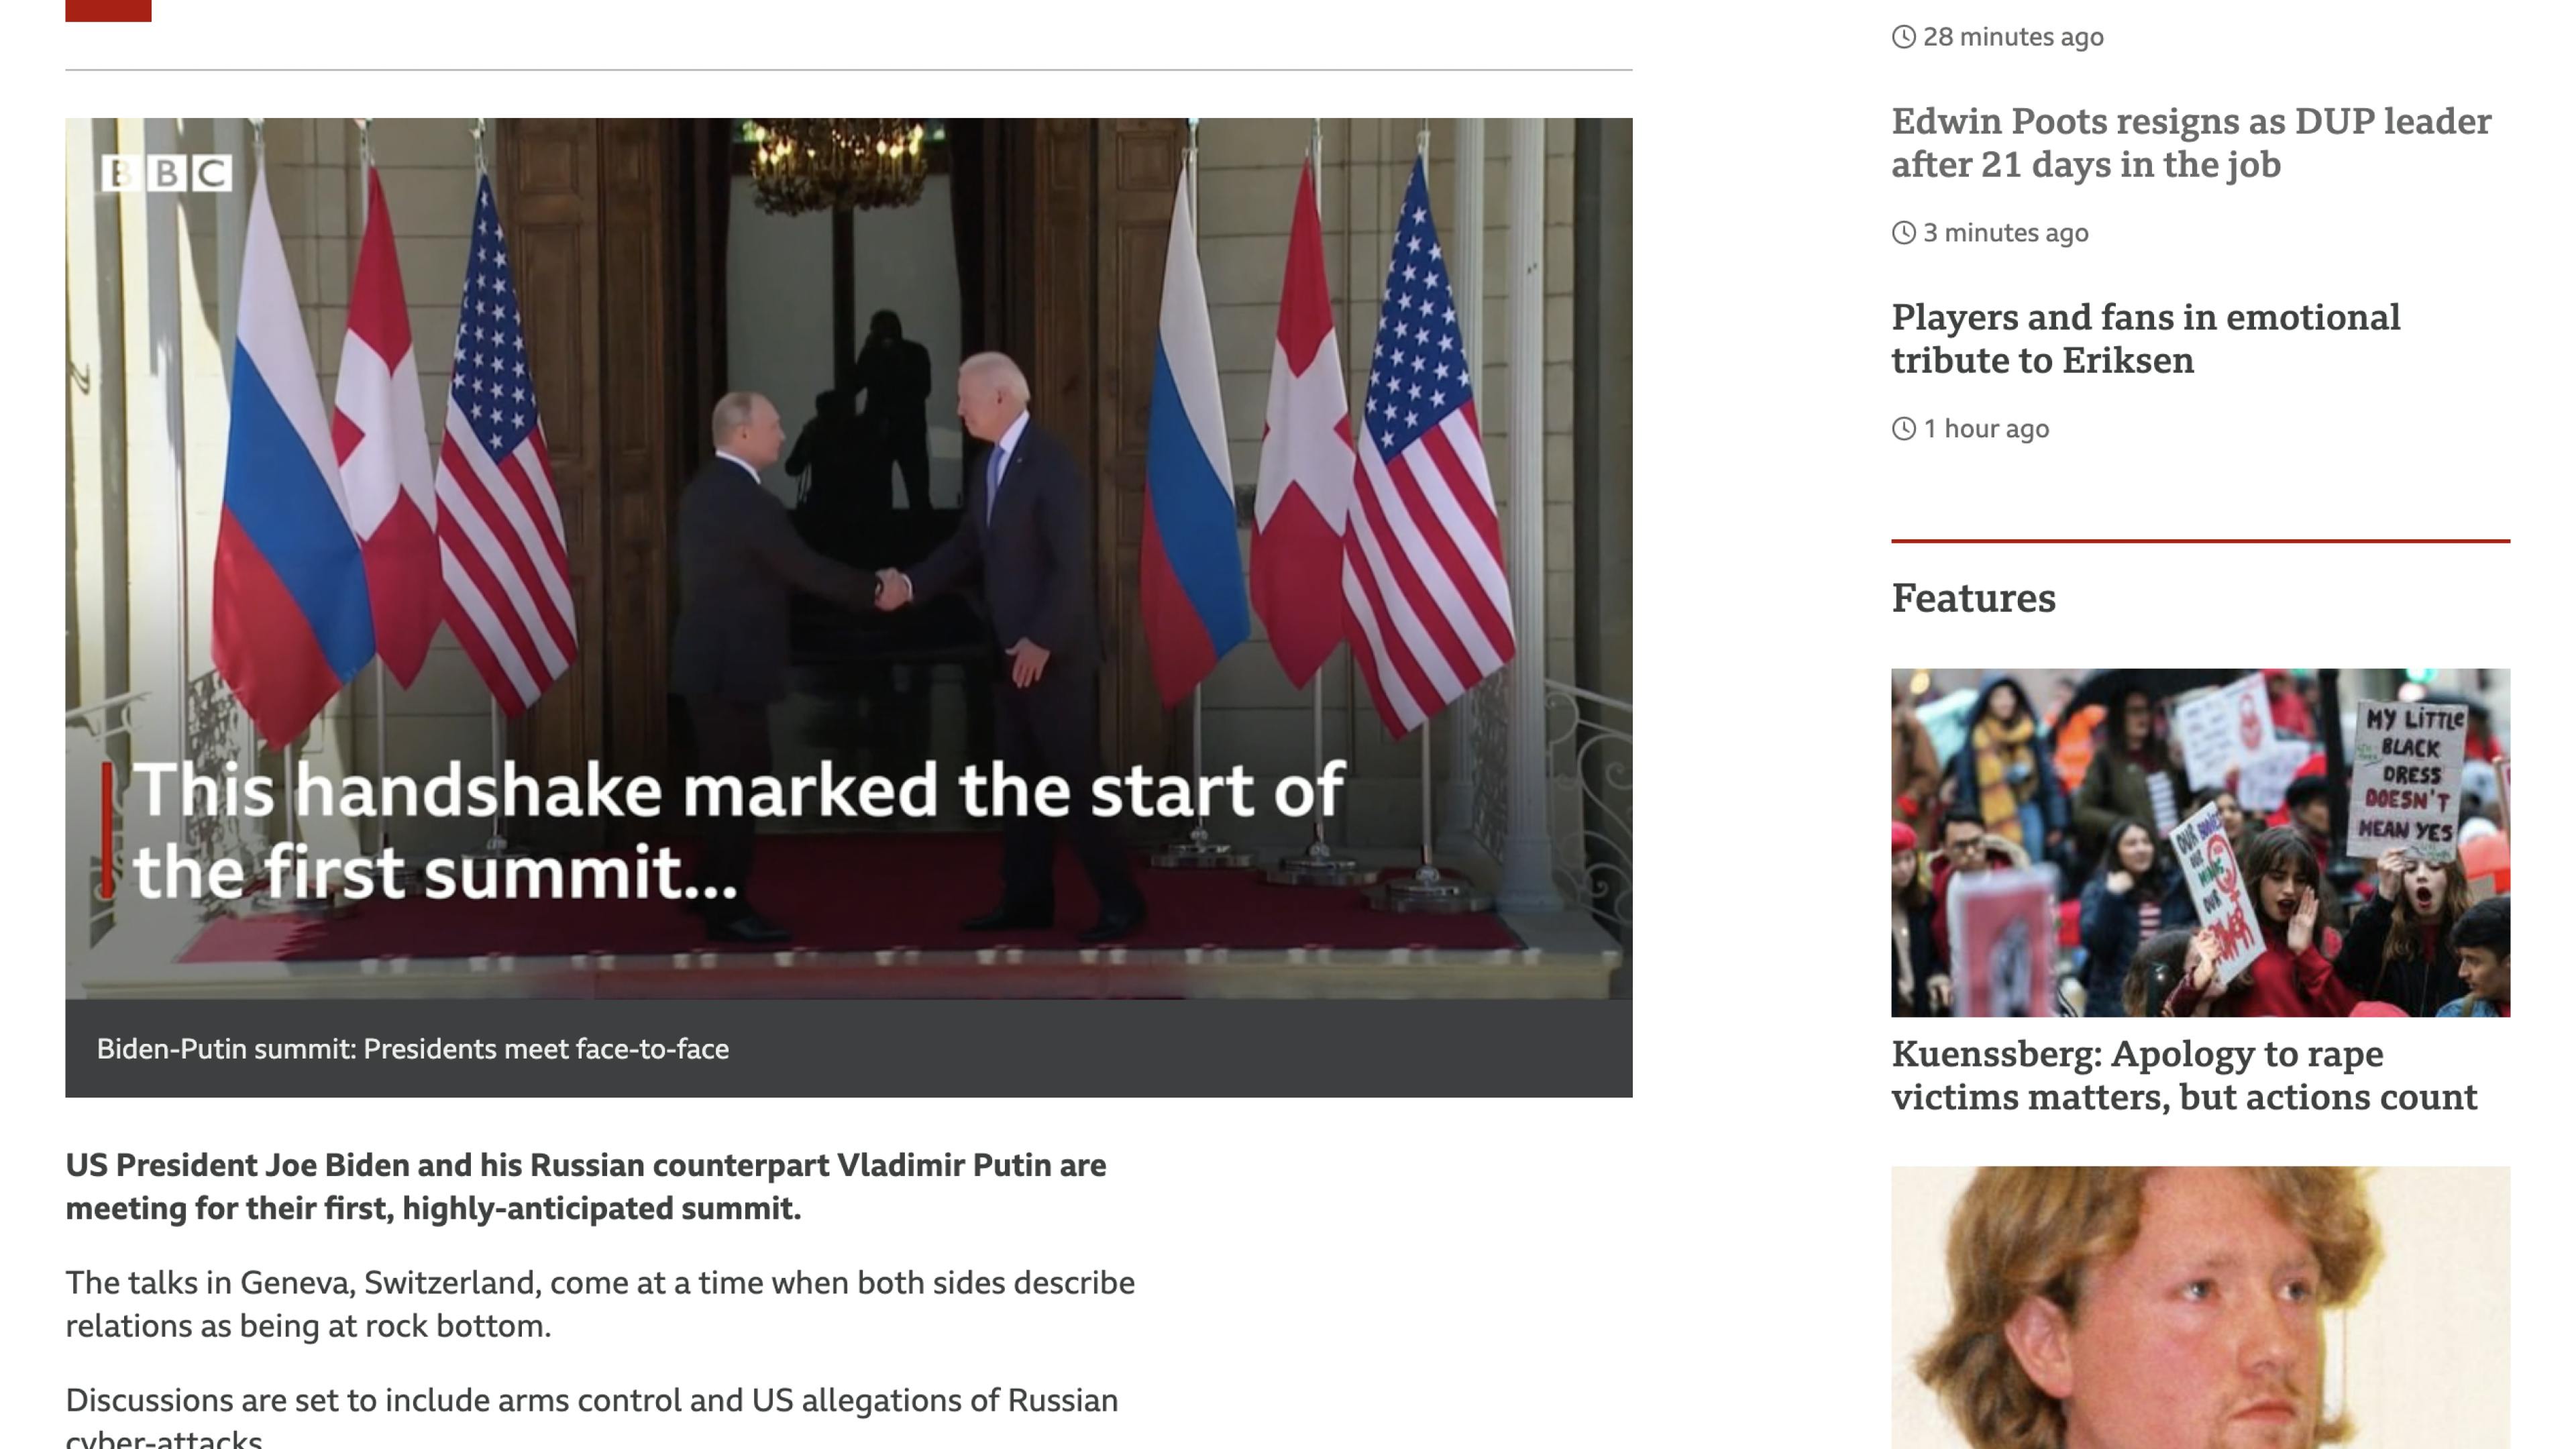 A screenshot from the BBC news site. It shows a video at the top of the page, followed by a passage of text